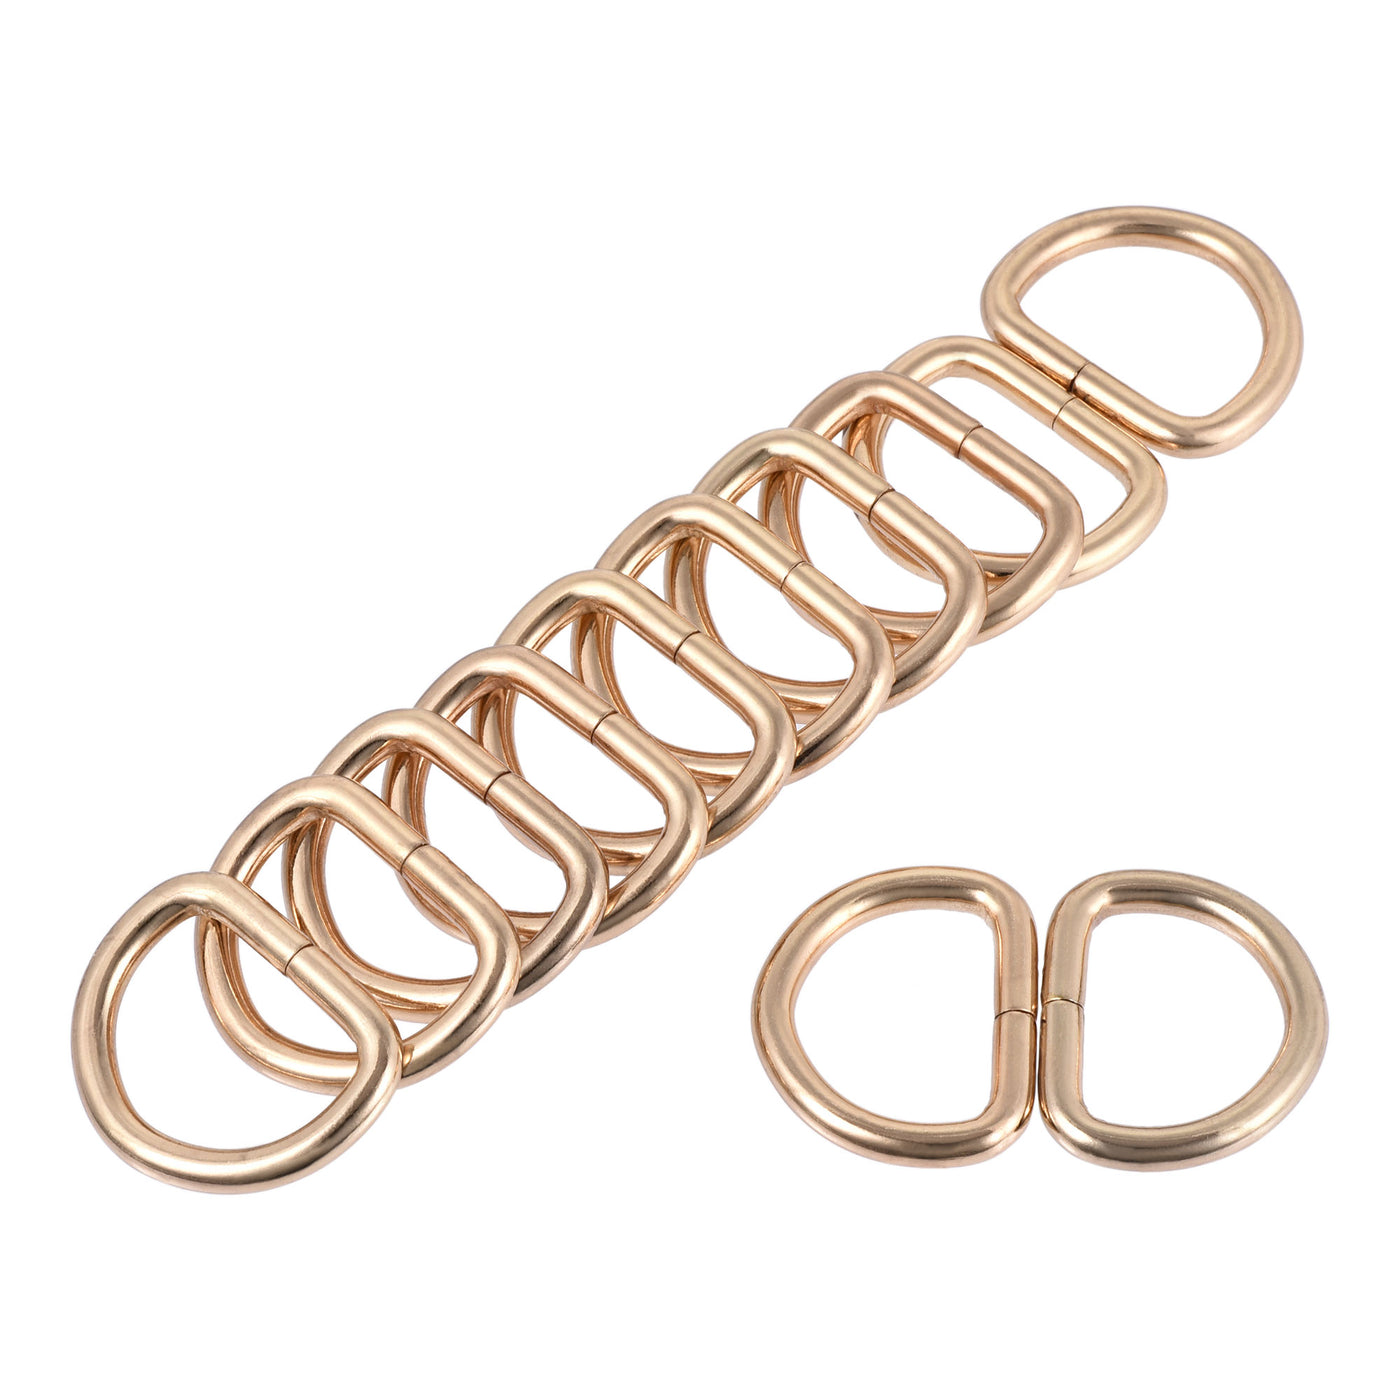 uxcell Uxcell Metal D Ring 0.98"(25mm) D-Rings Buckle for Hardware Bags Belts Craft DIY Accessories Gold Tone 12pcs